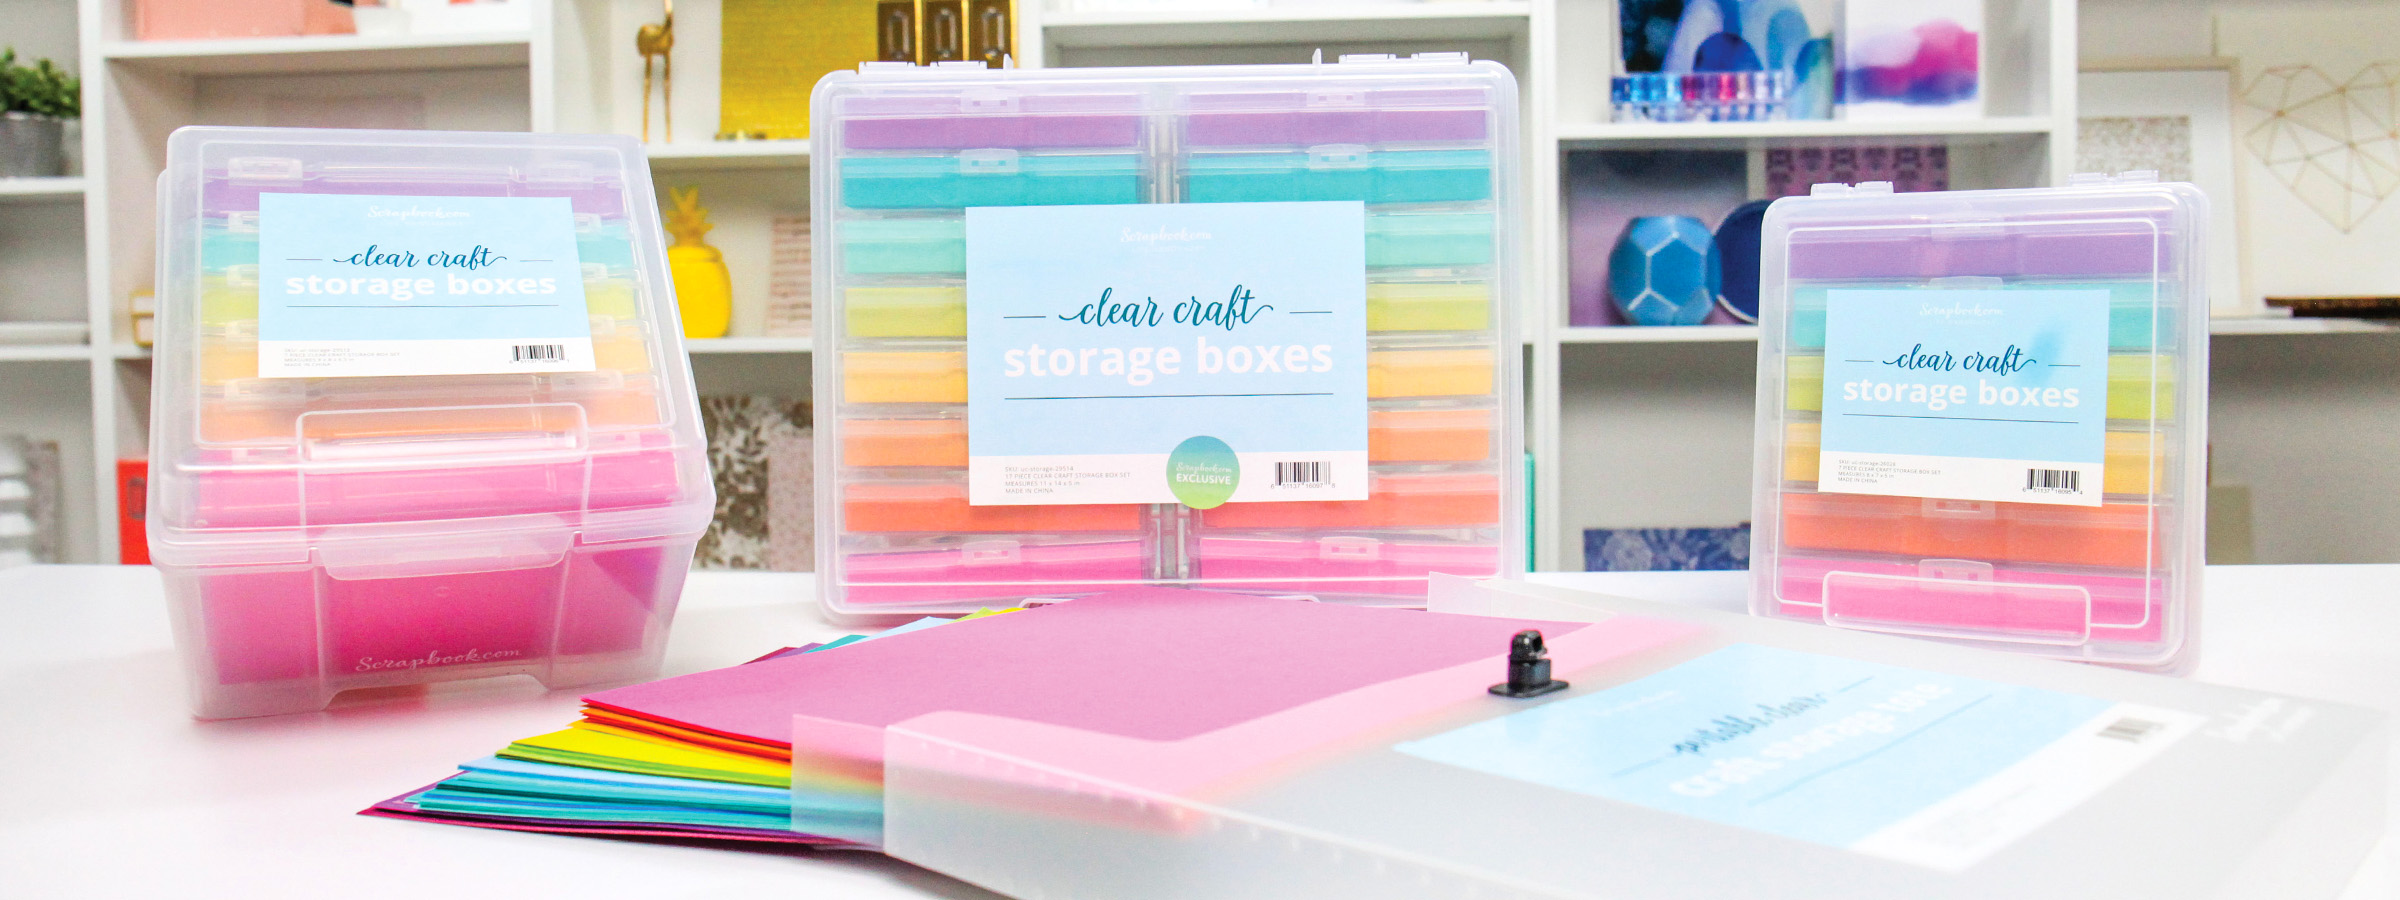 The Definitive Guide to Organizing Craft Supplies